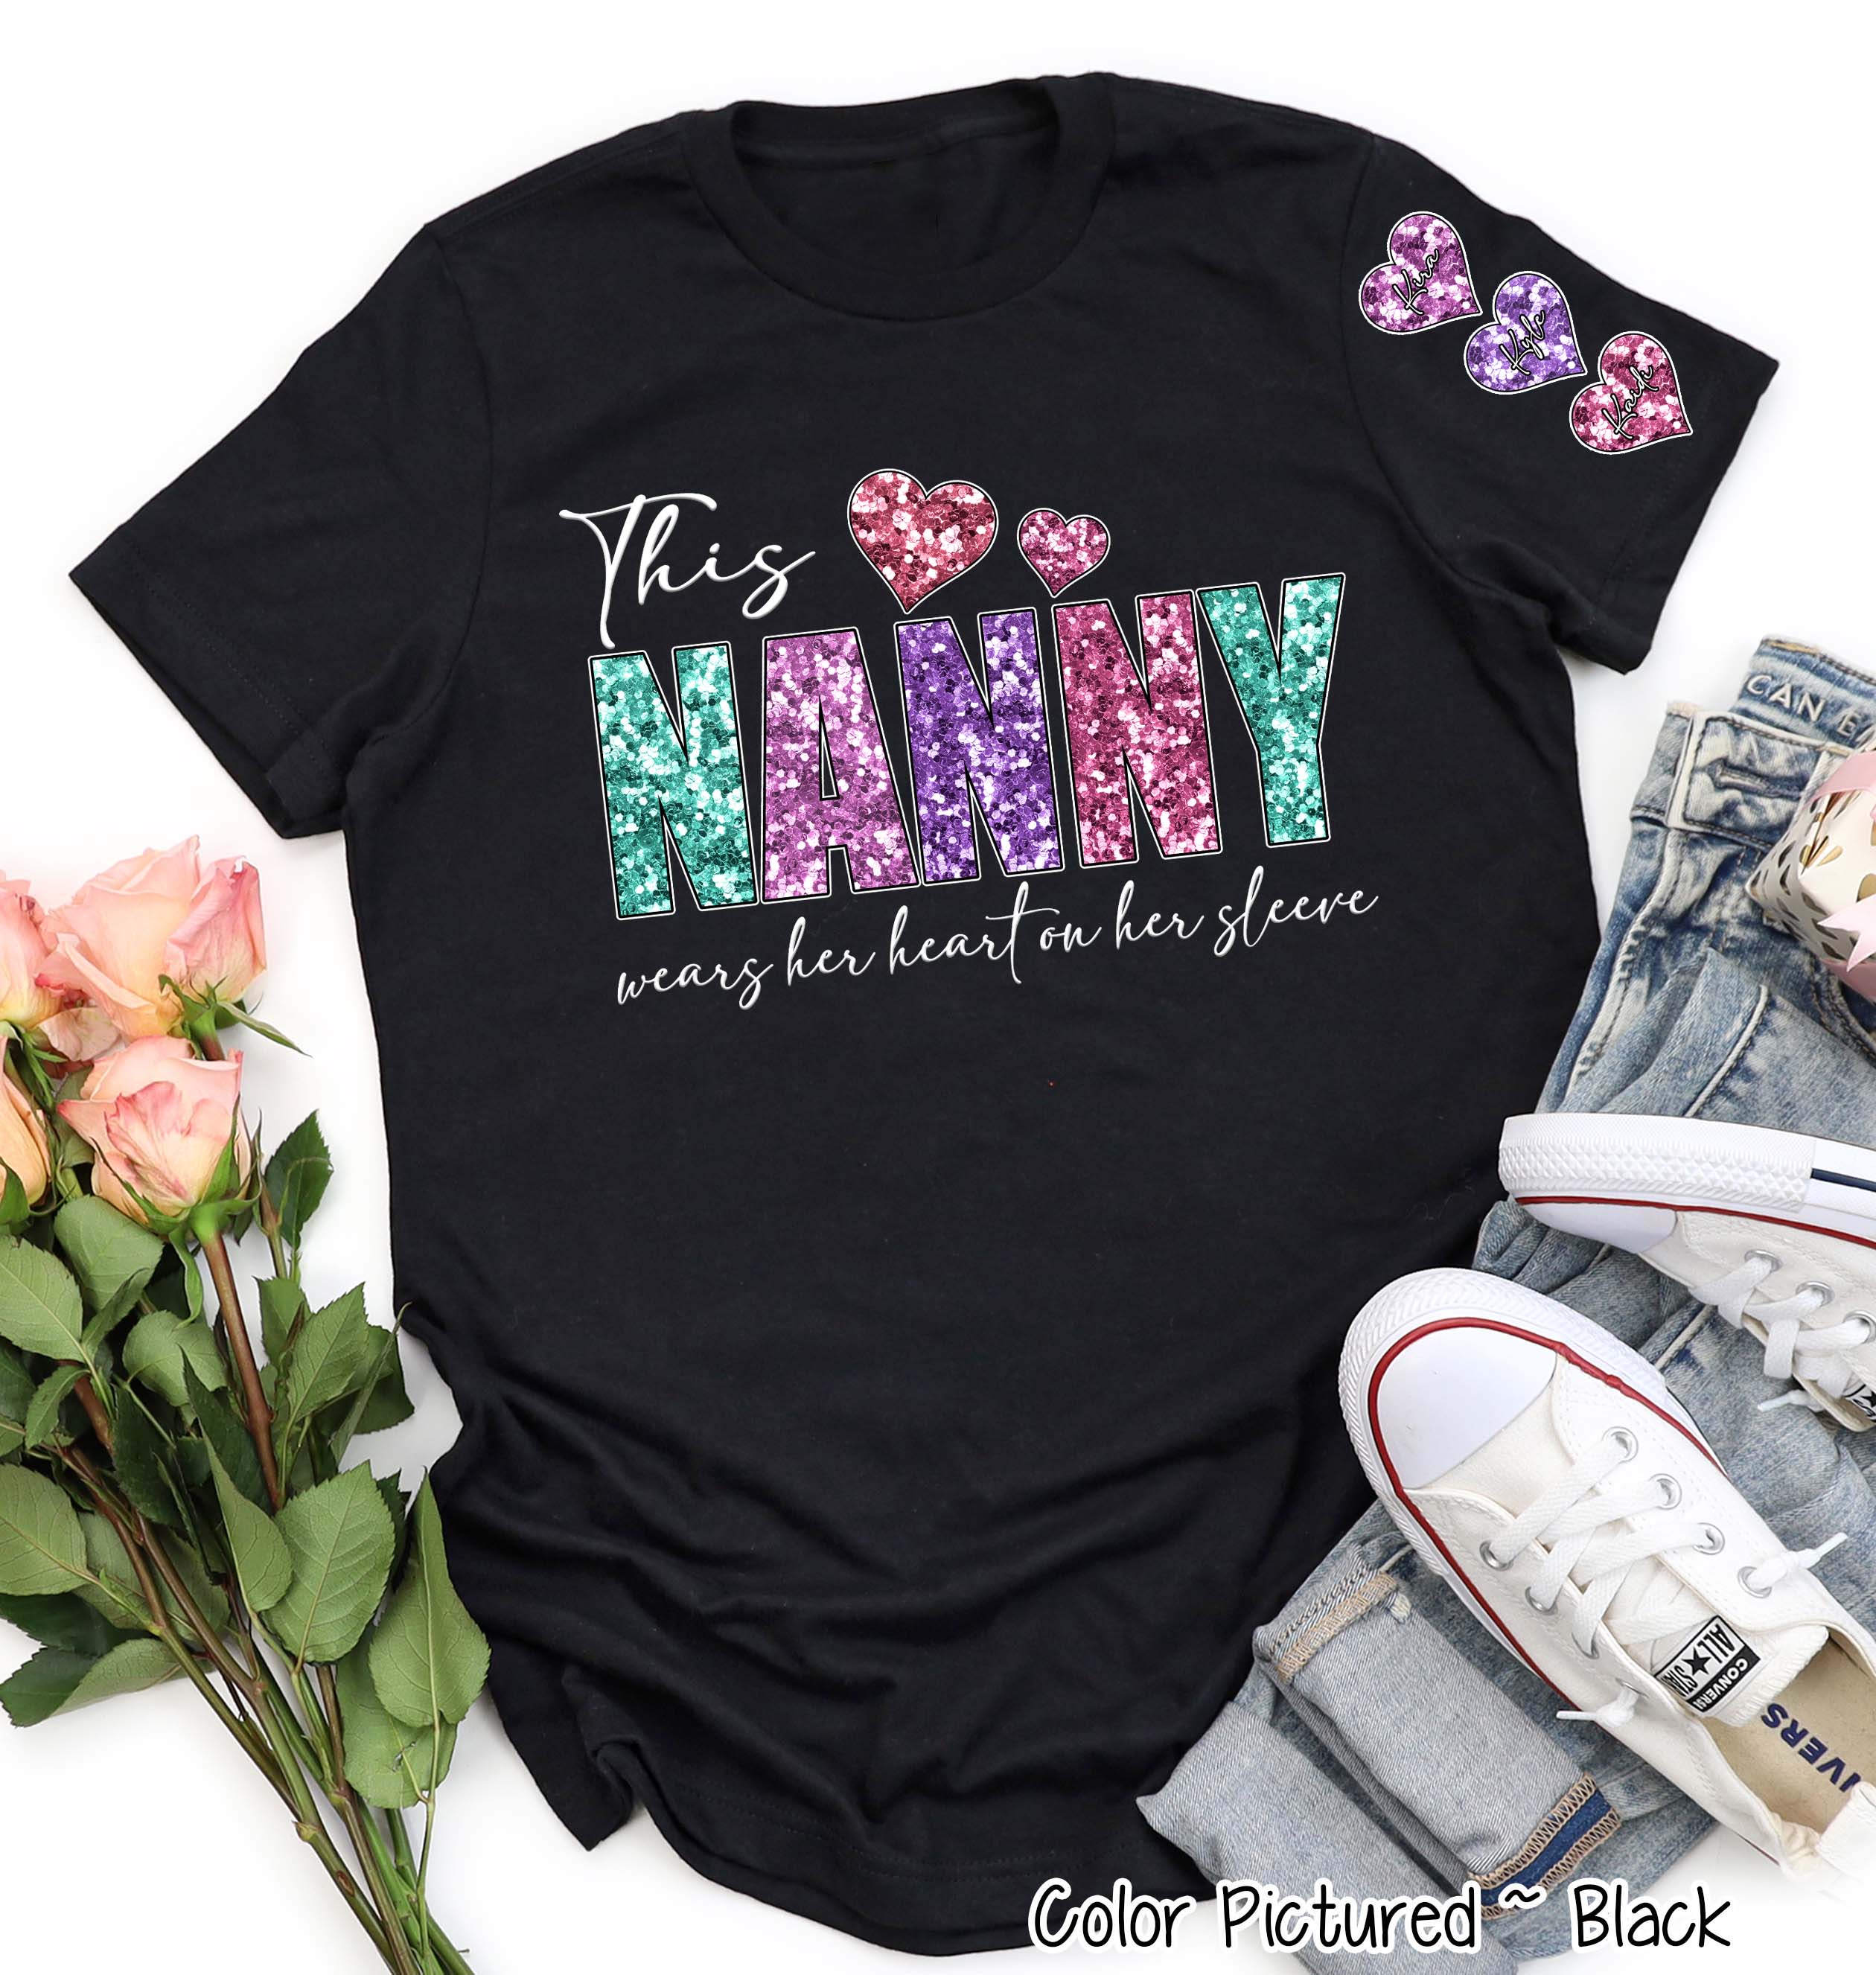 Personalized Rainbow Wearing My Heart on My Sleeve with Kids Names Valentine Tee or Sweatshirt